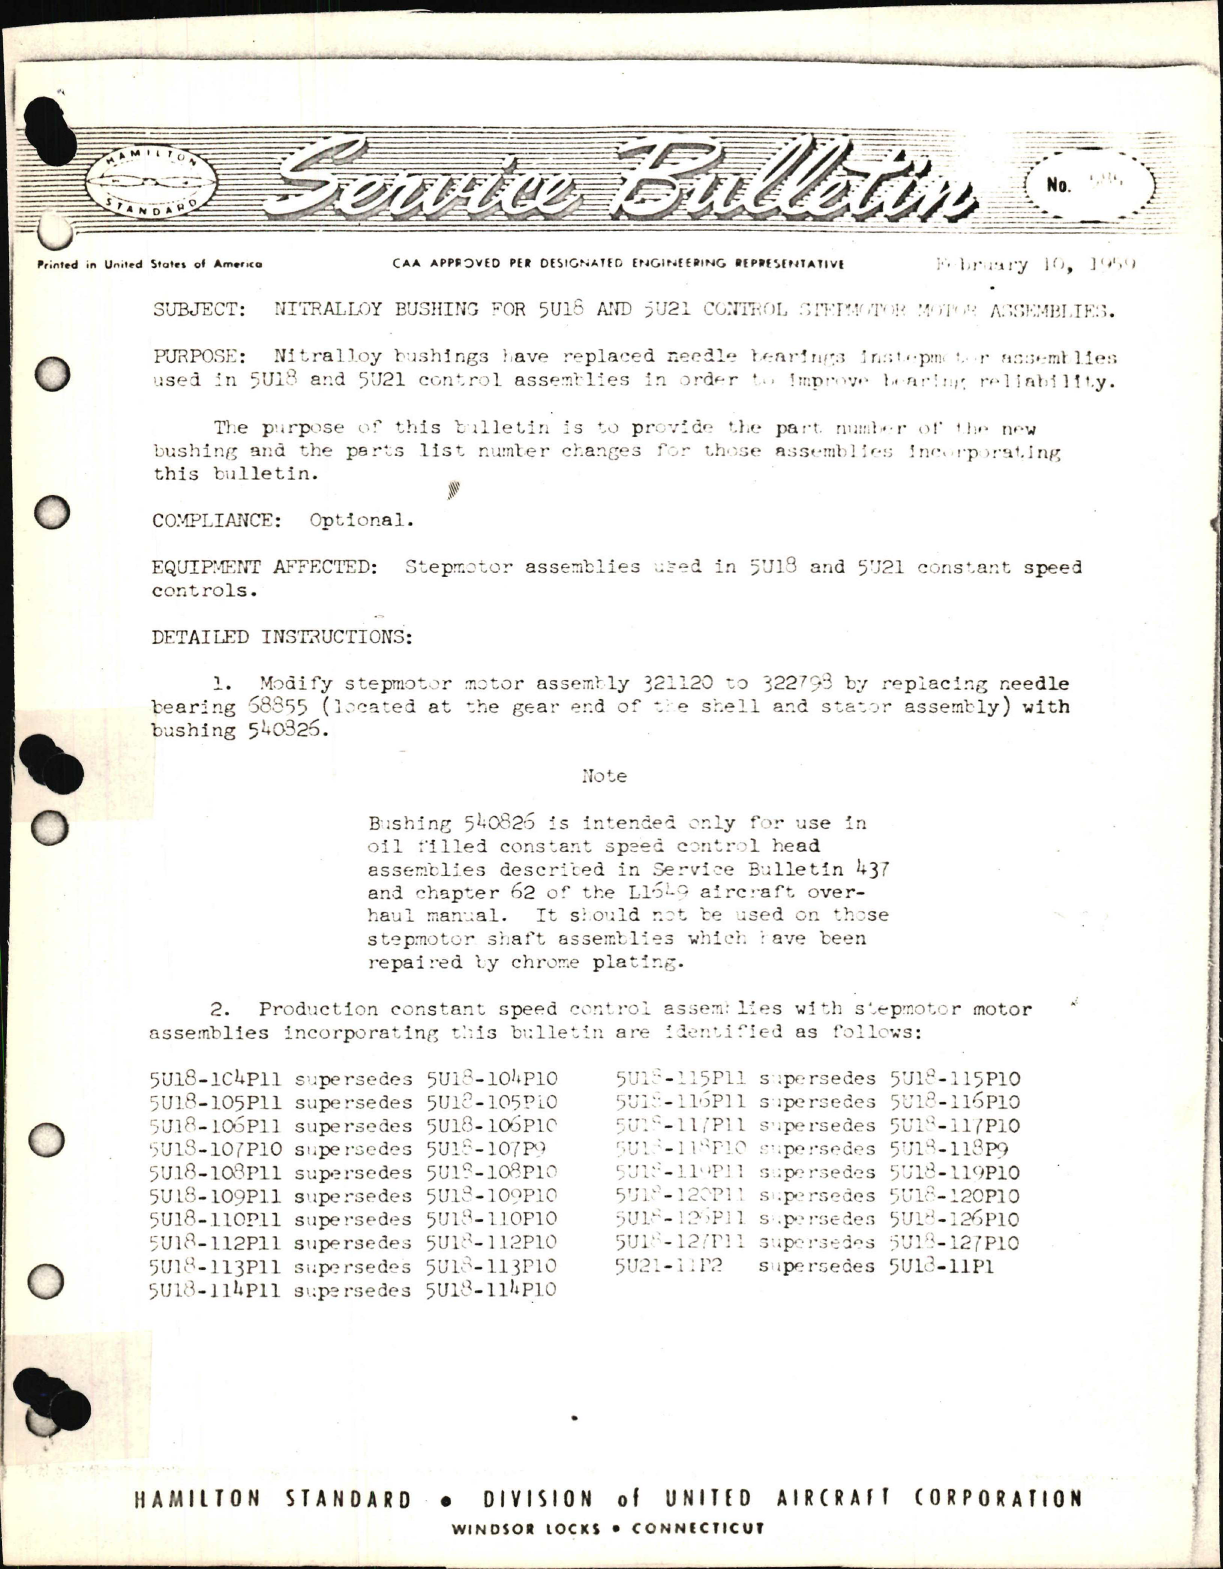 Sample page 1 from AirCorps Library document: Nitralloy Bushing for 5U18 and 5U21Control Stepmotor Motor Assemblies